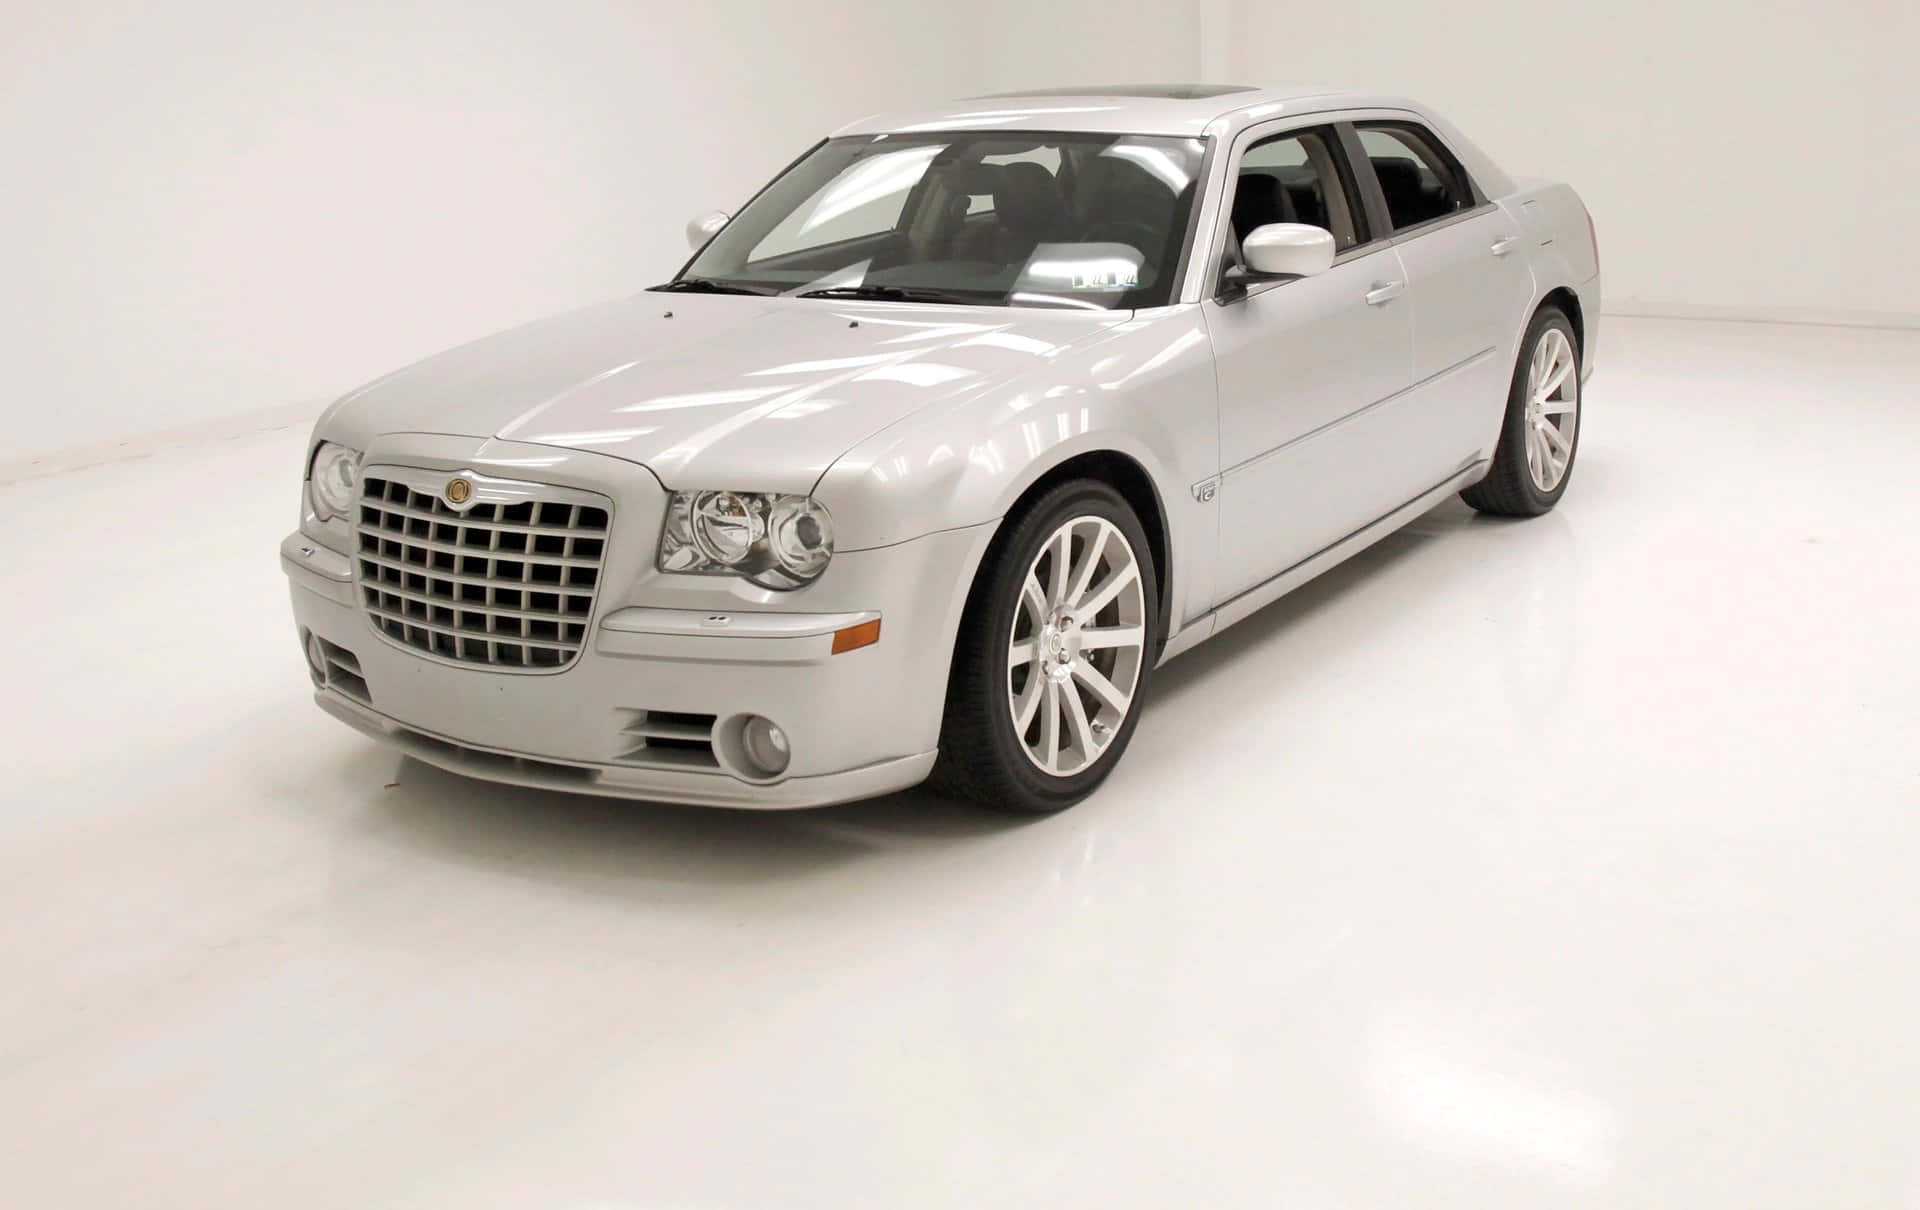 Chrysler vehicles offer luxury combined with elegance.